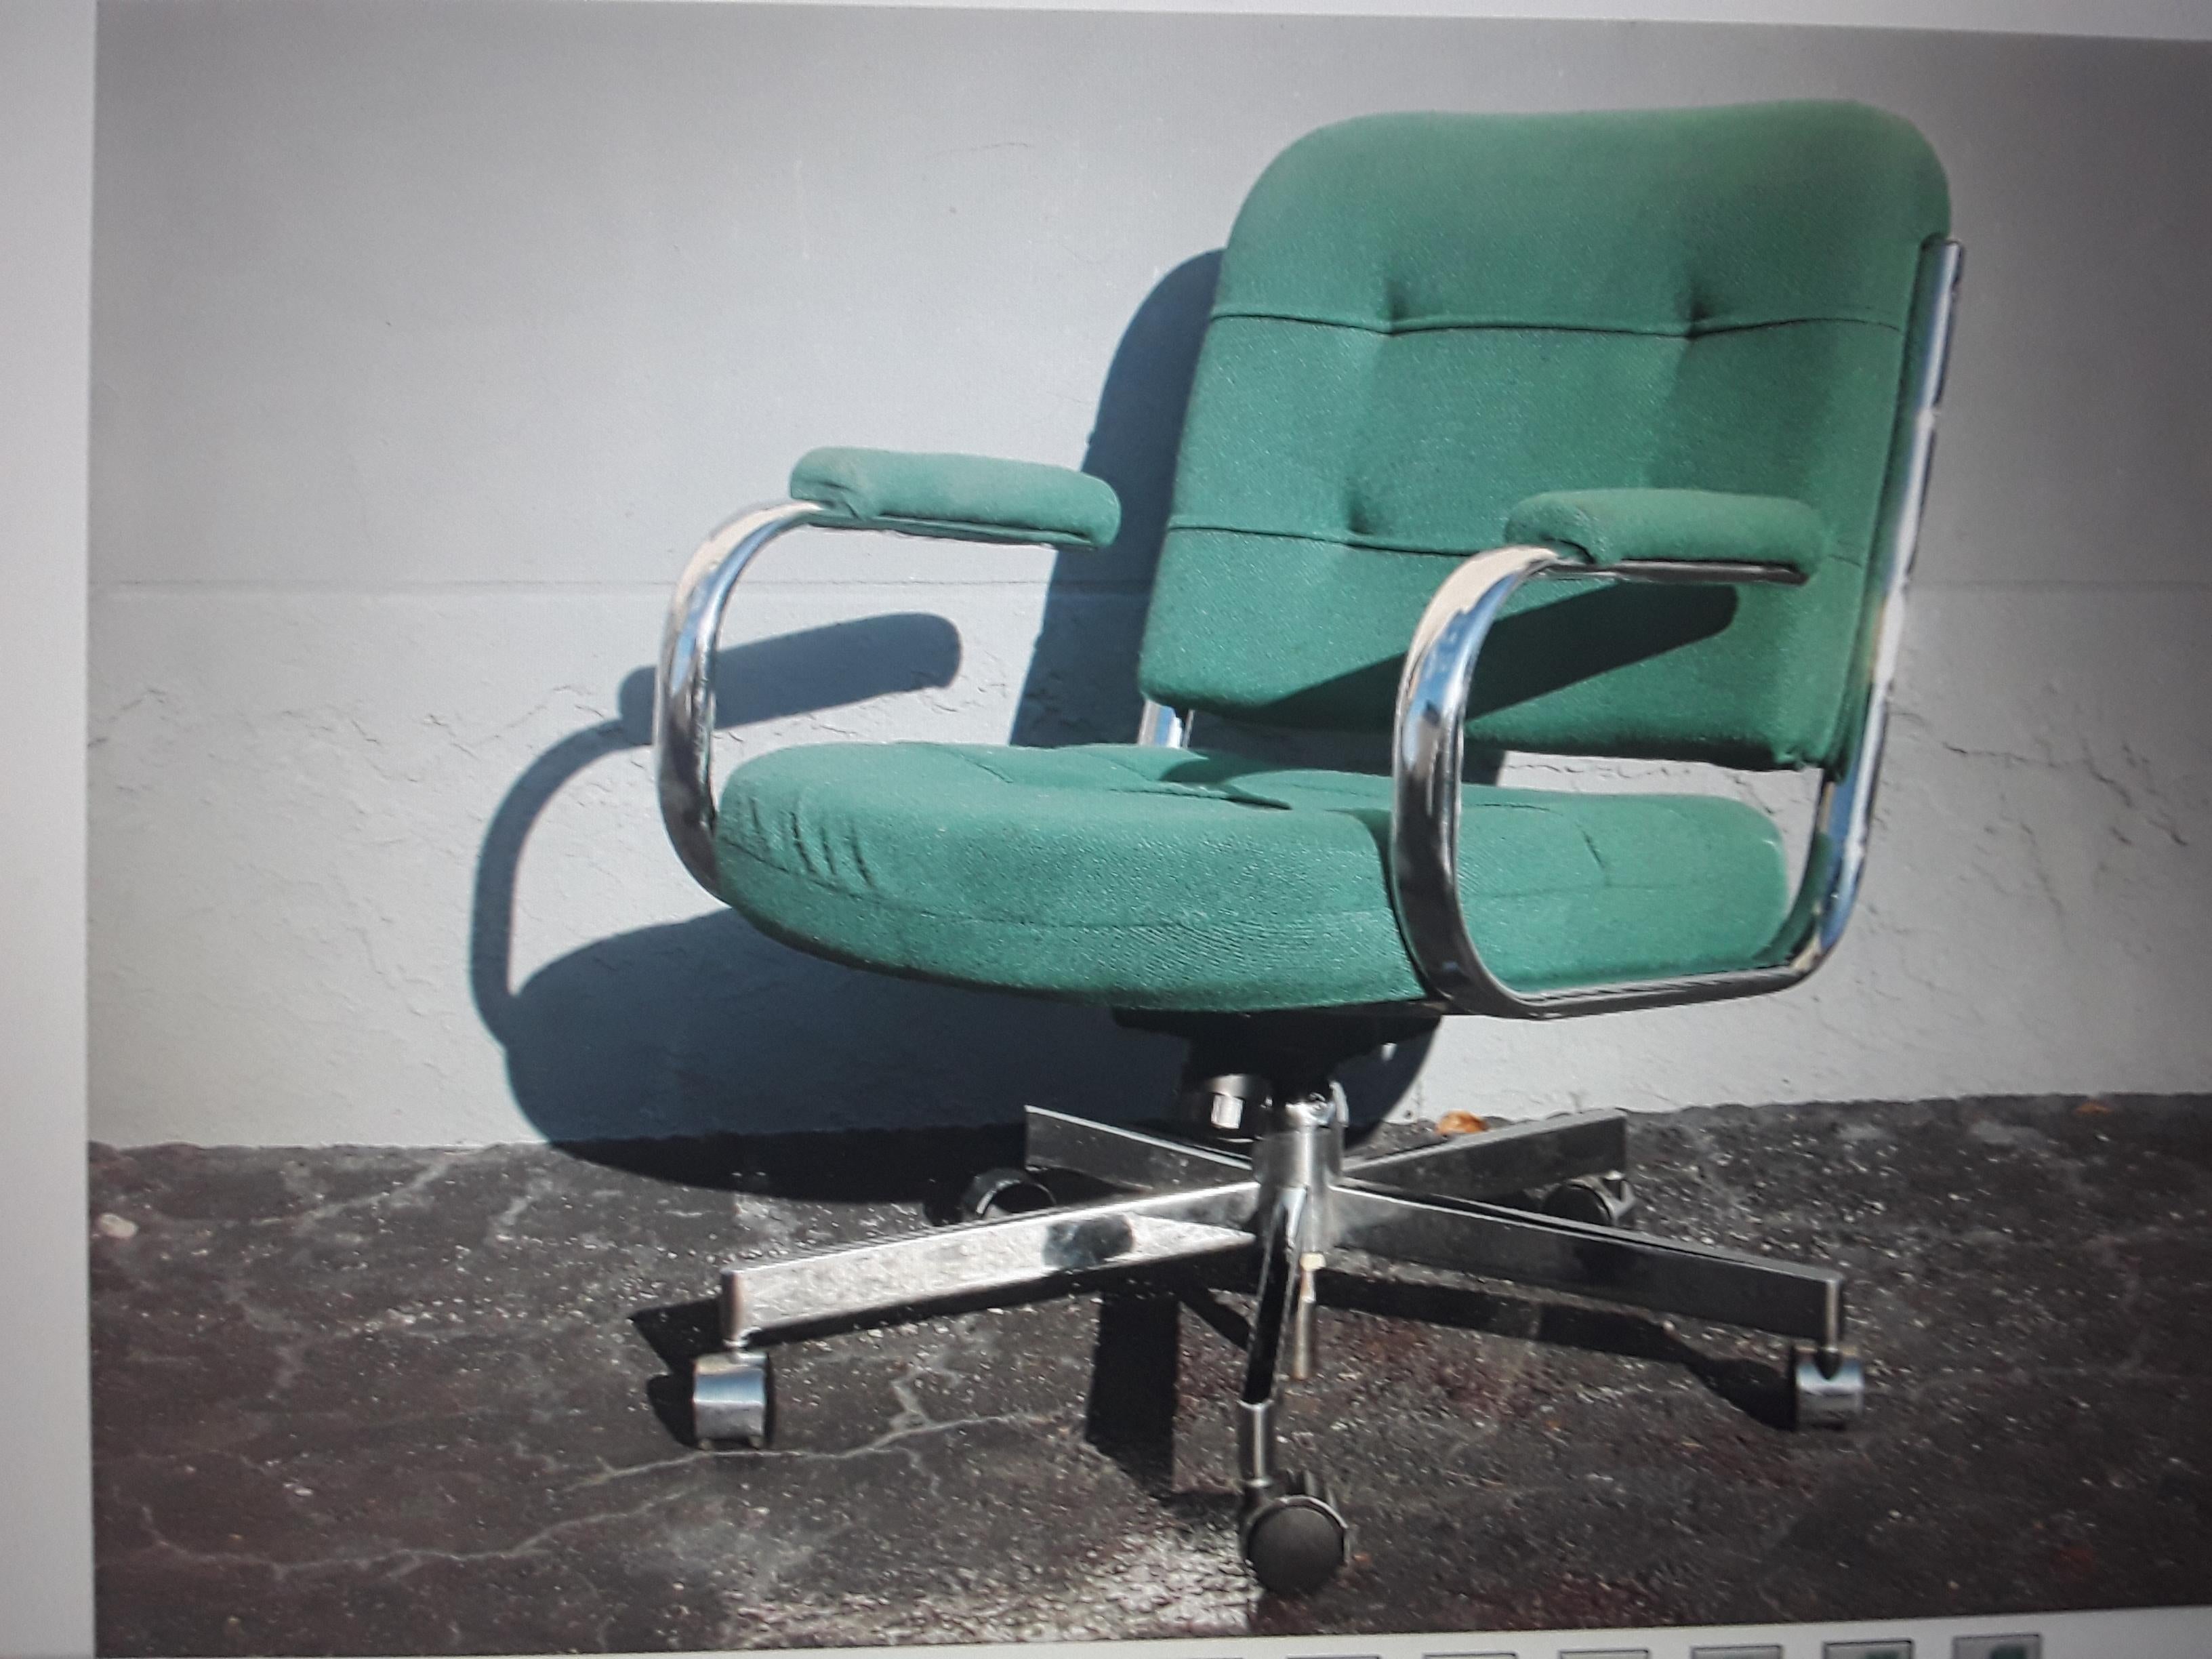 1970's Ultra Modern Adjustable Office Desk Chair In Good Condition For Sale In Opa Locka, FL